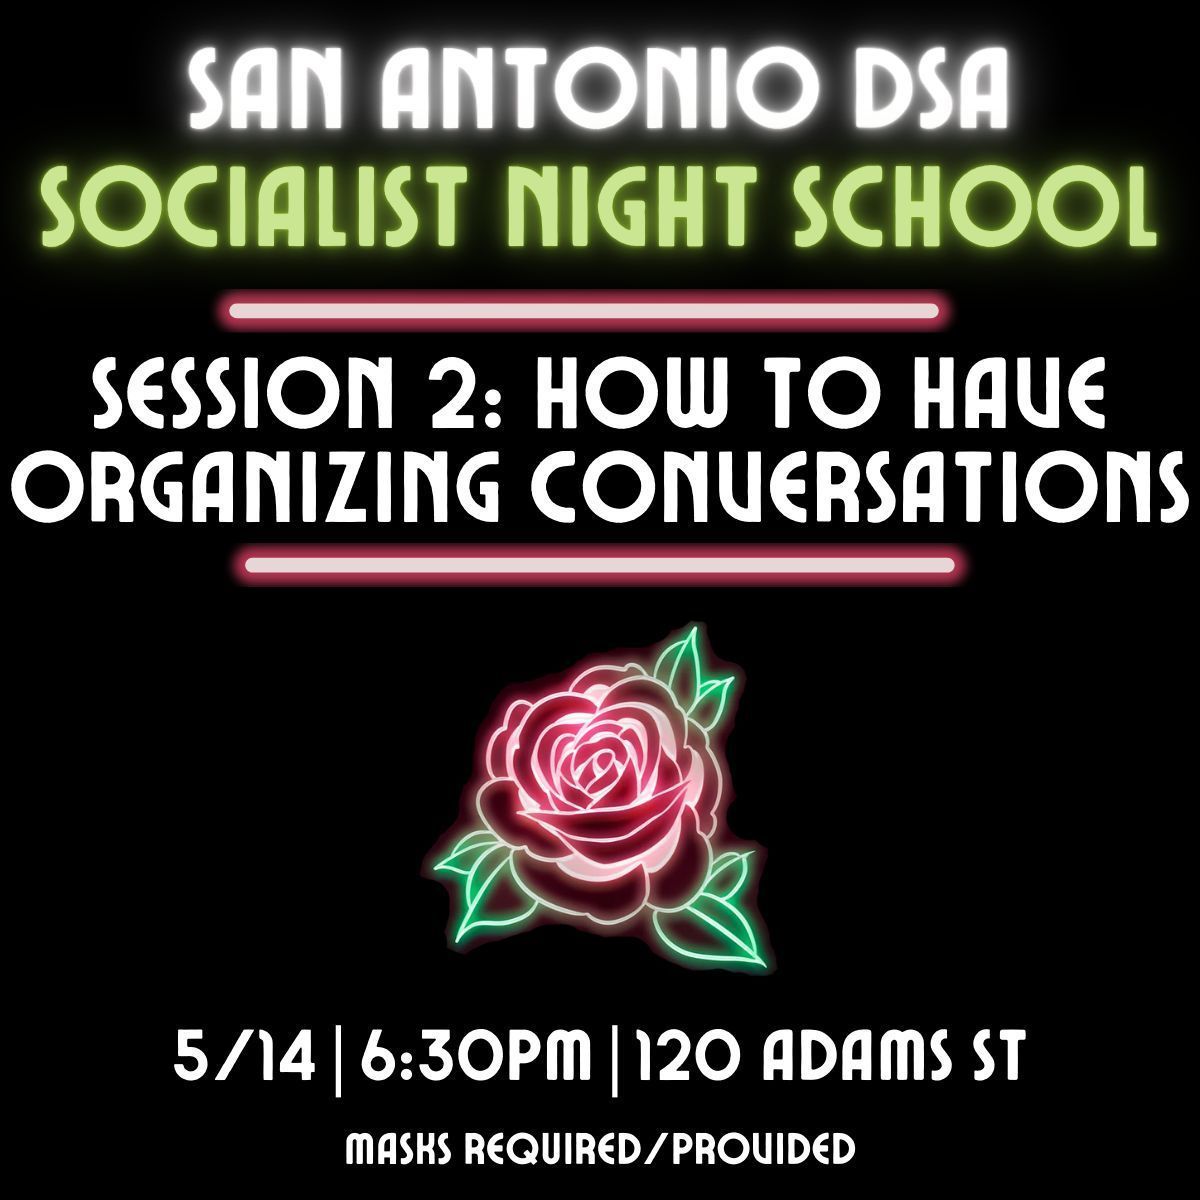 Join us at our second Socialist Night School! Come learn from a fellow SA DSA member about how to have effective organizing conversations. This is a great session for new and experienced organizers! Register at Tiny.cc/NightSchool